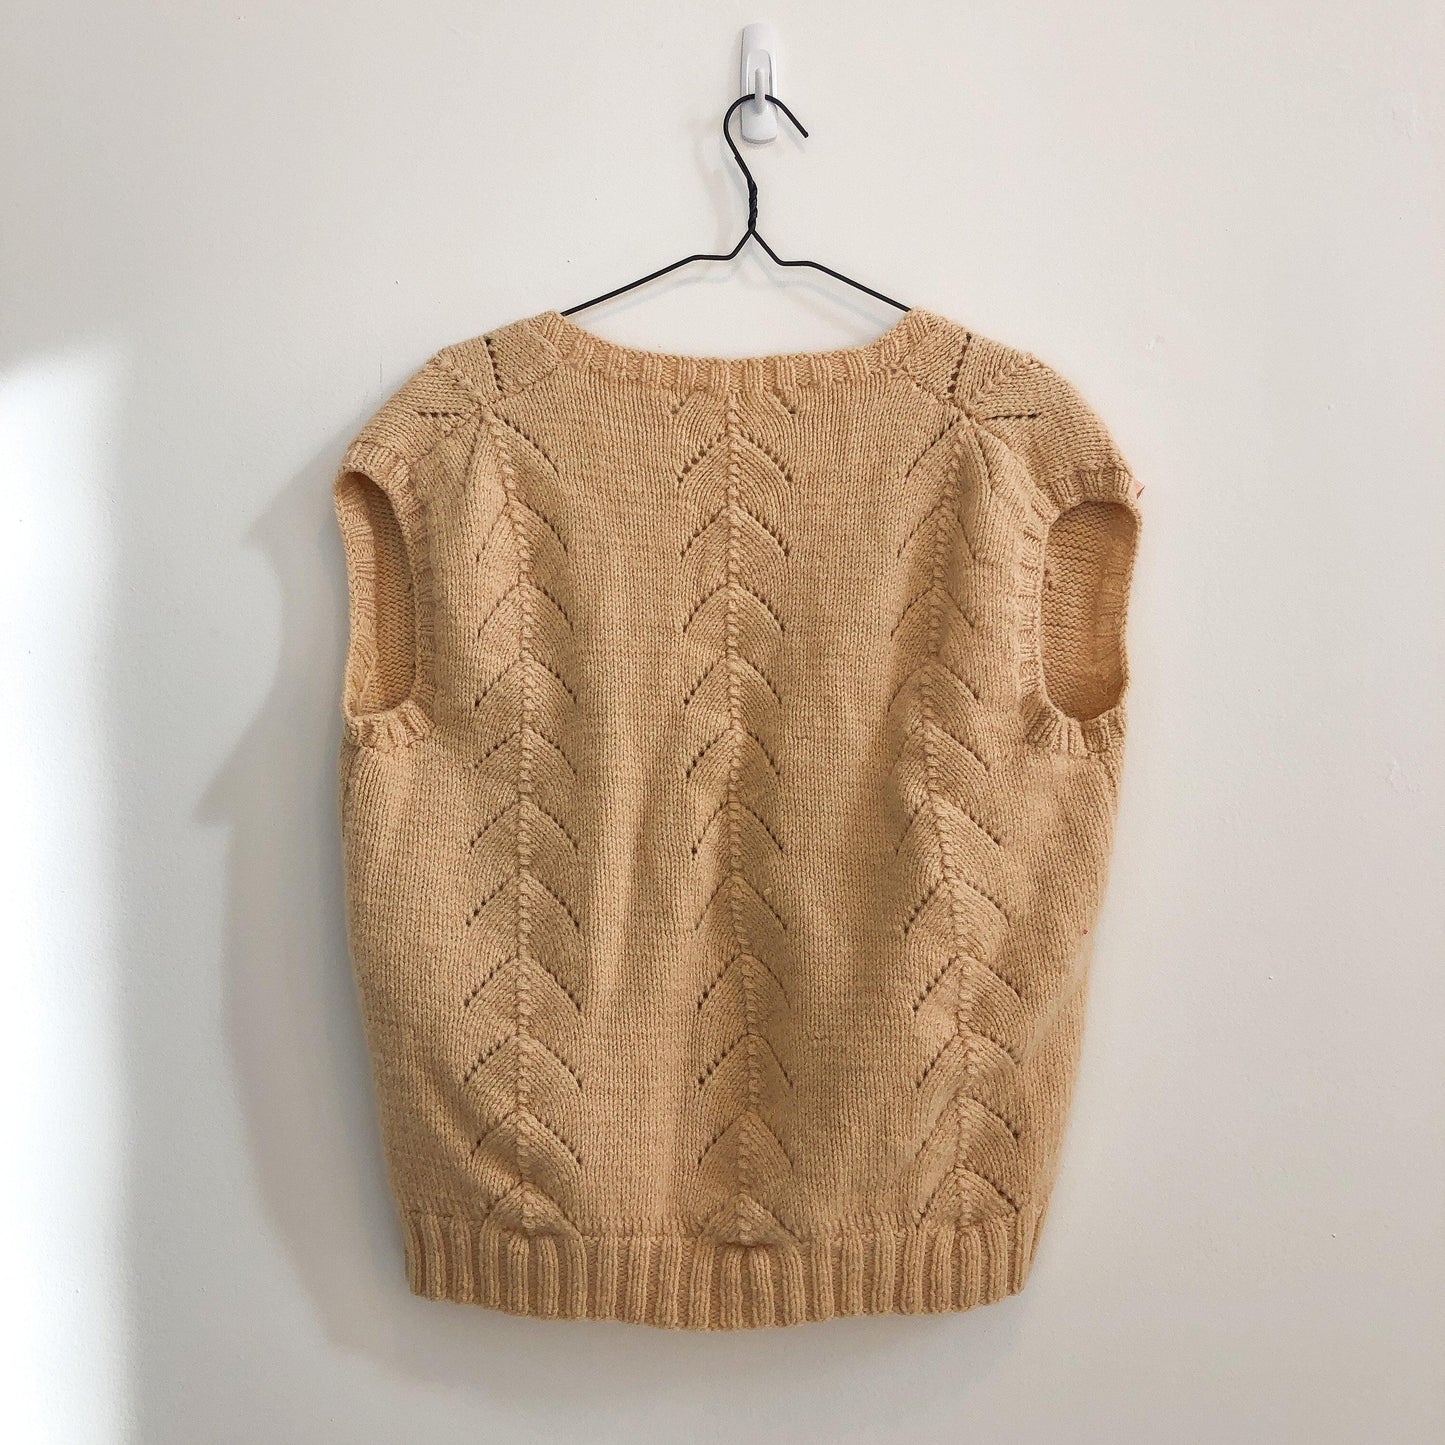 Arch Knit Sweater Vest - Upcycled Aviary